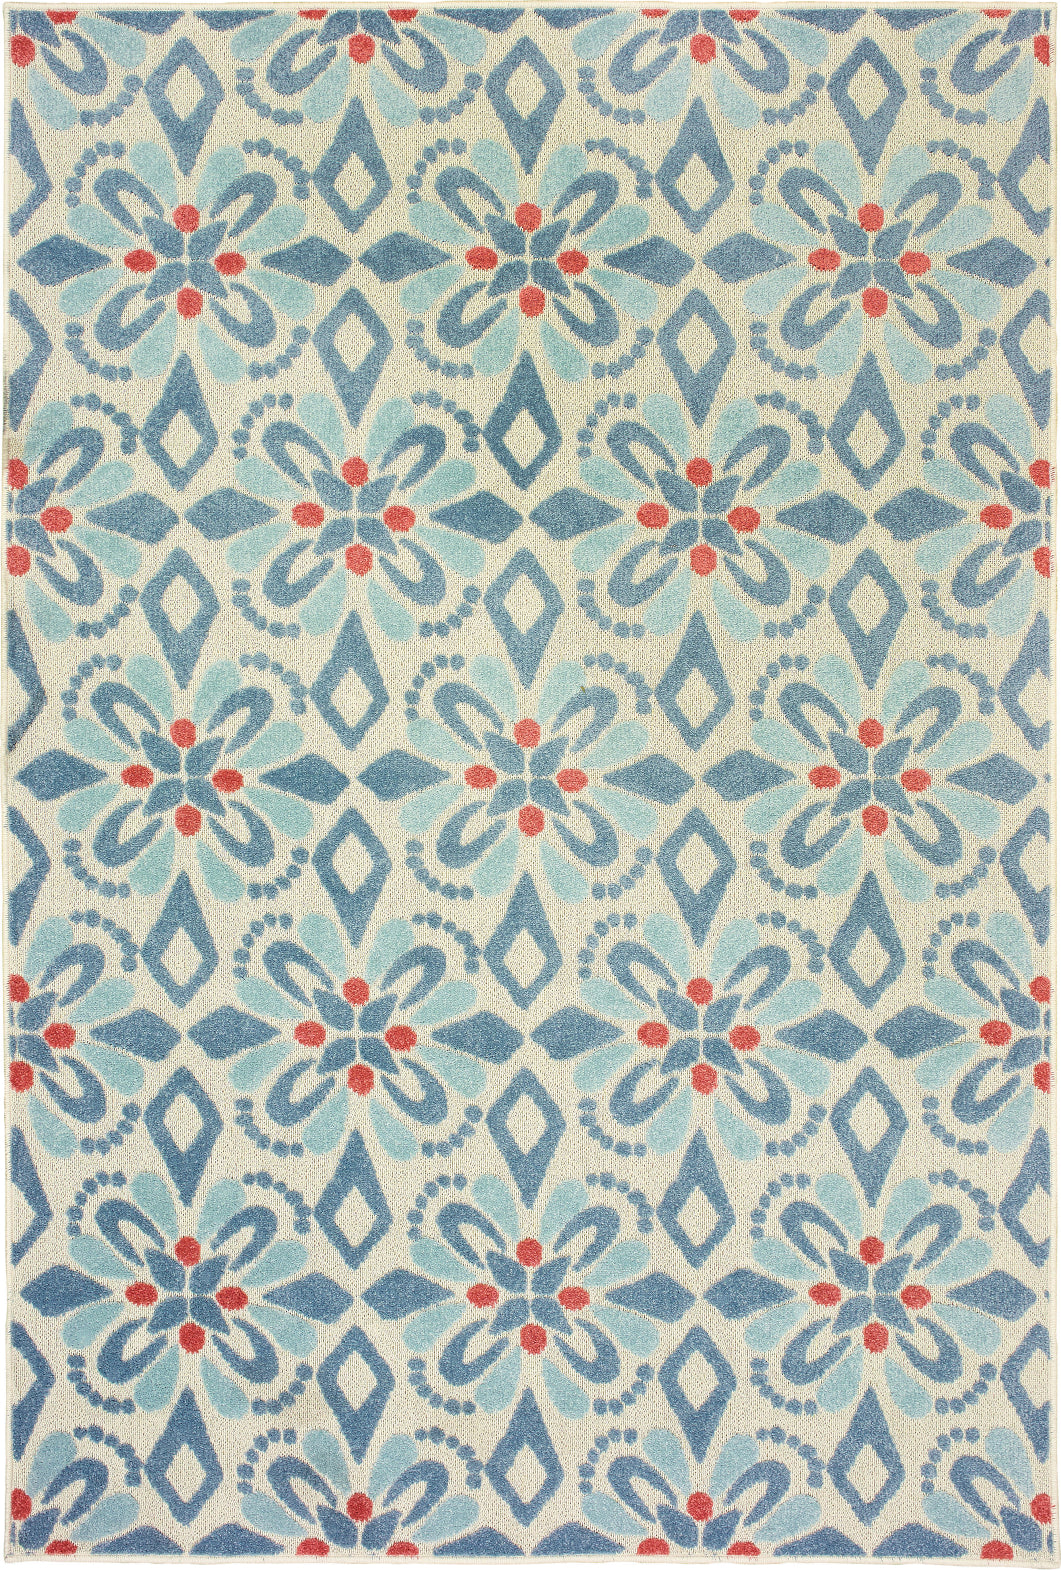 Oriental Weavers Barbados 5994Z Blue/Ivory Area Rug main image featured